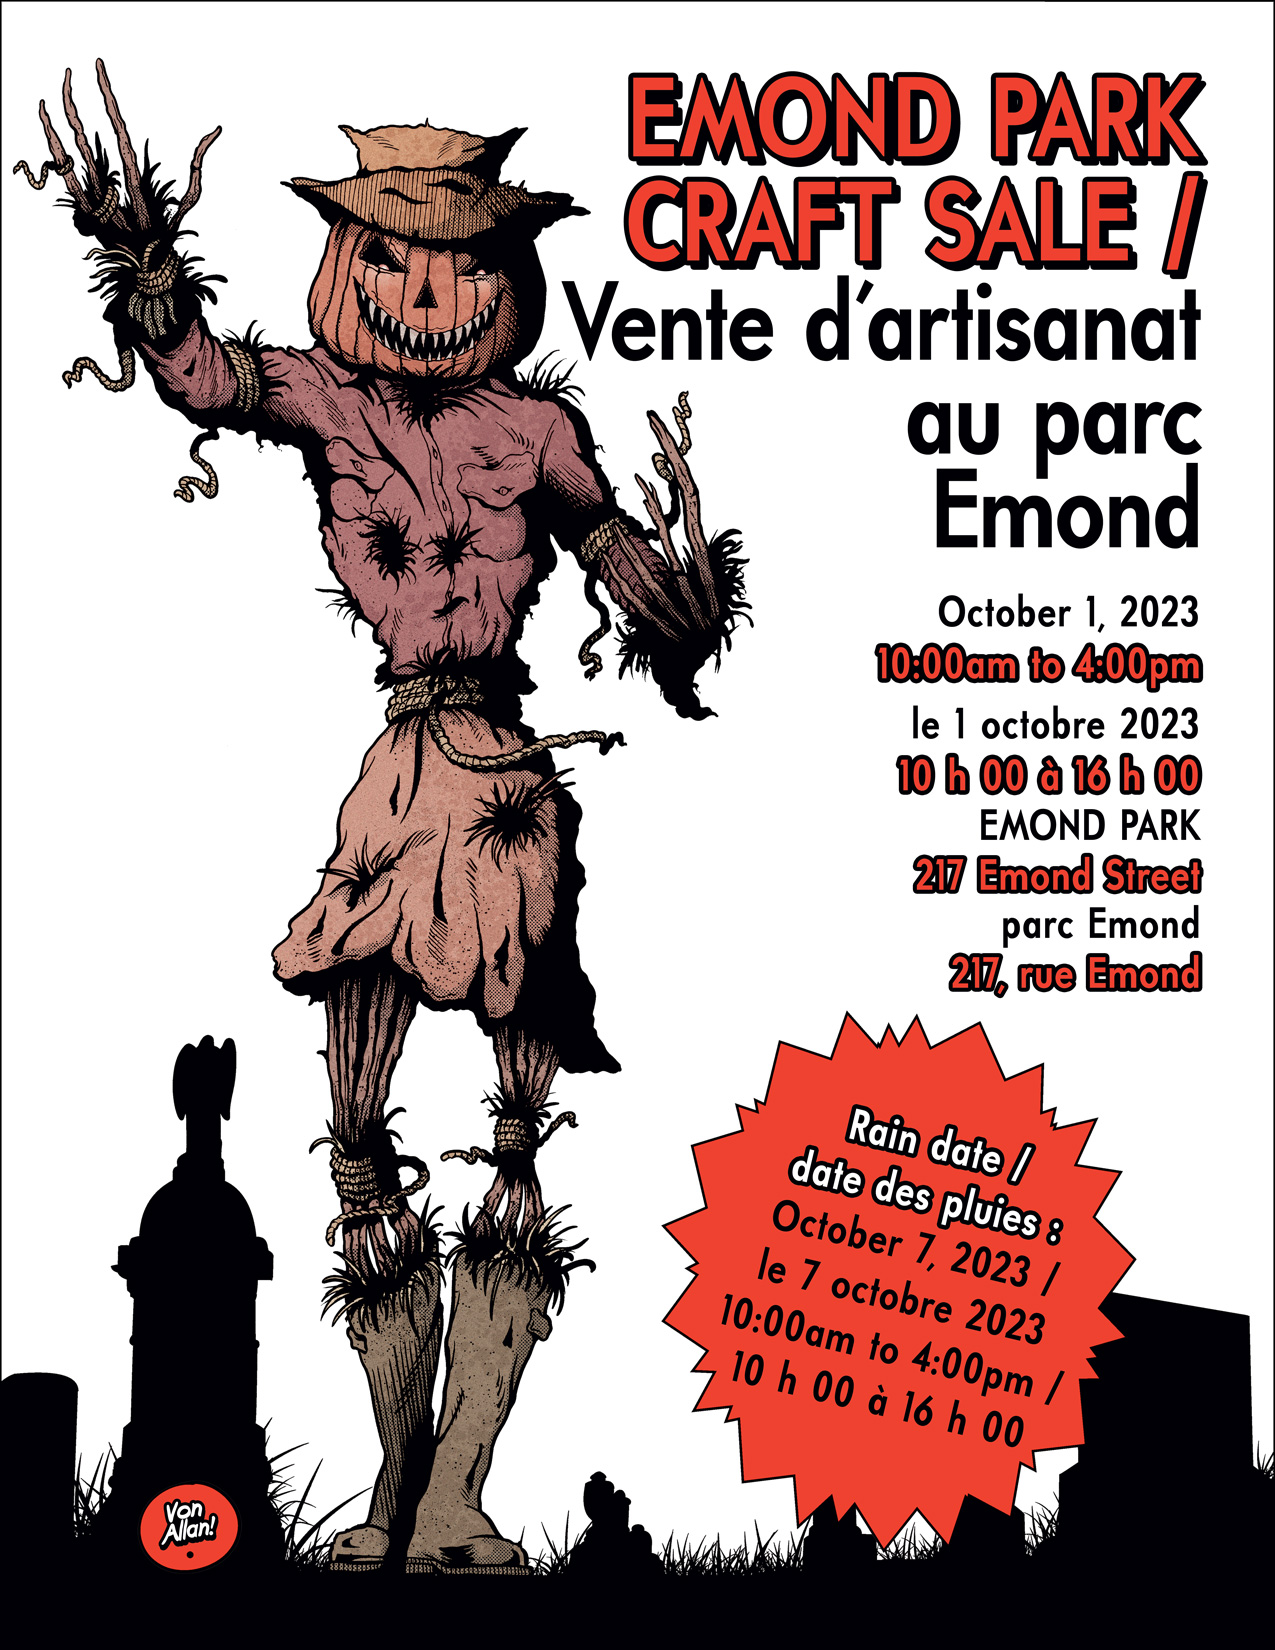 Poster illustration and design by Von Allan for the Halloween-themed Emond Park Craft Sale event in Ottawa, Ontario